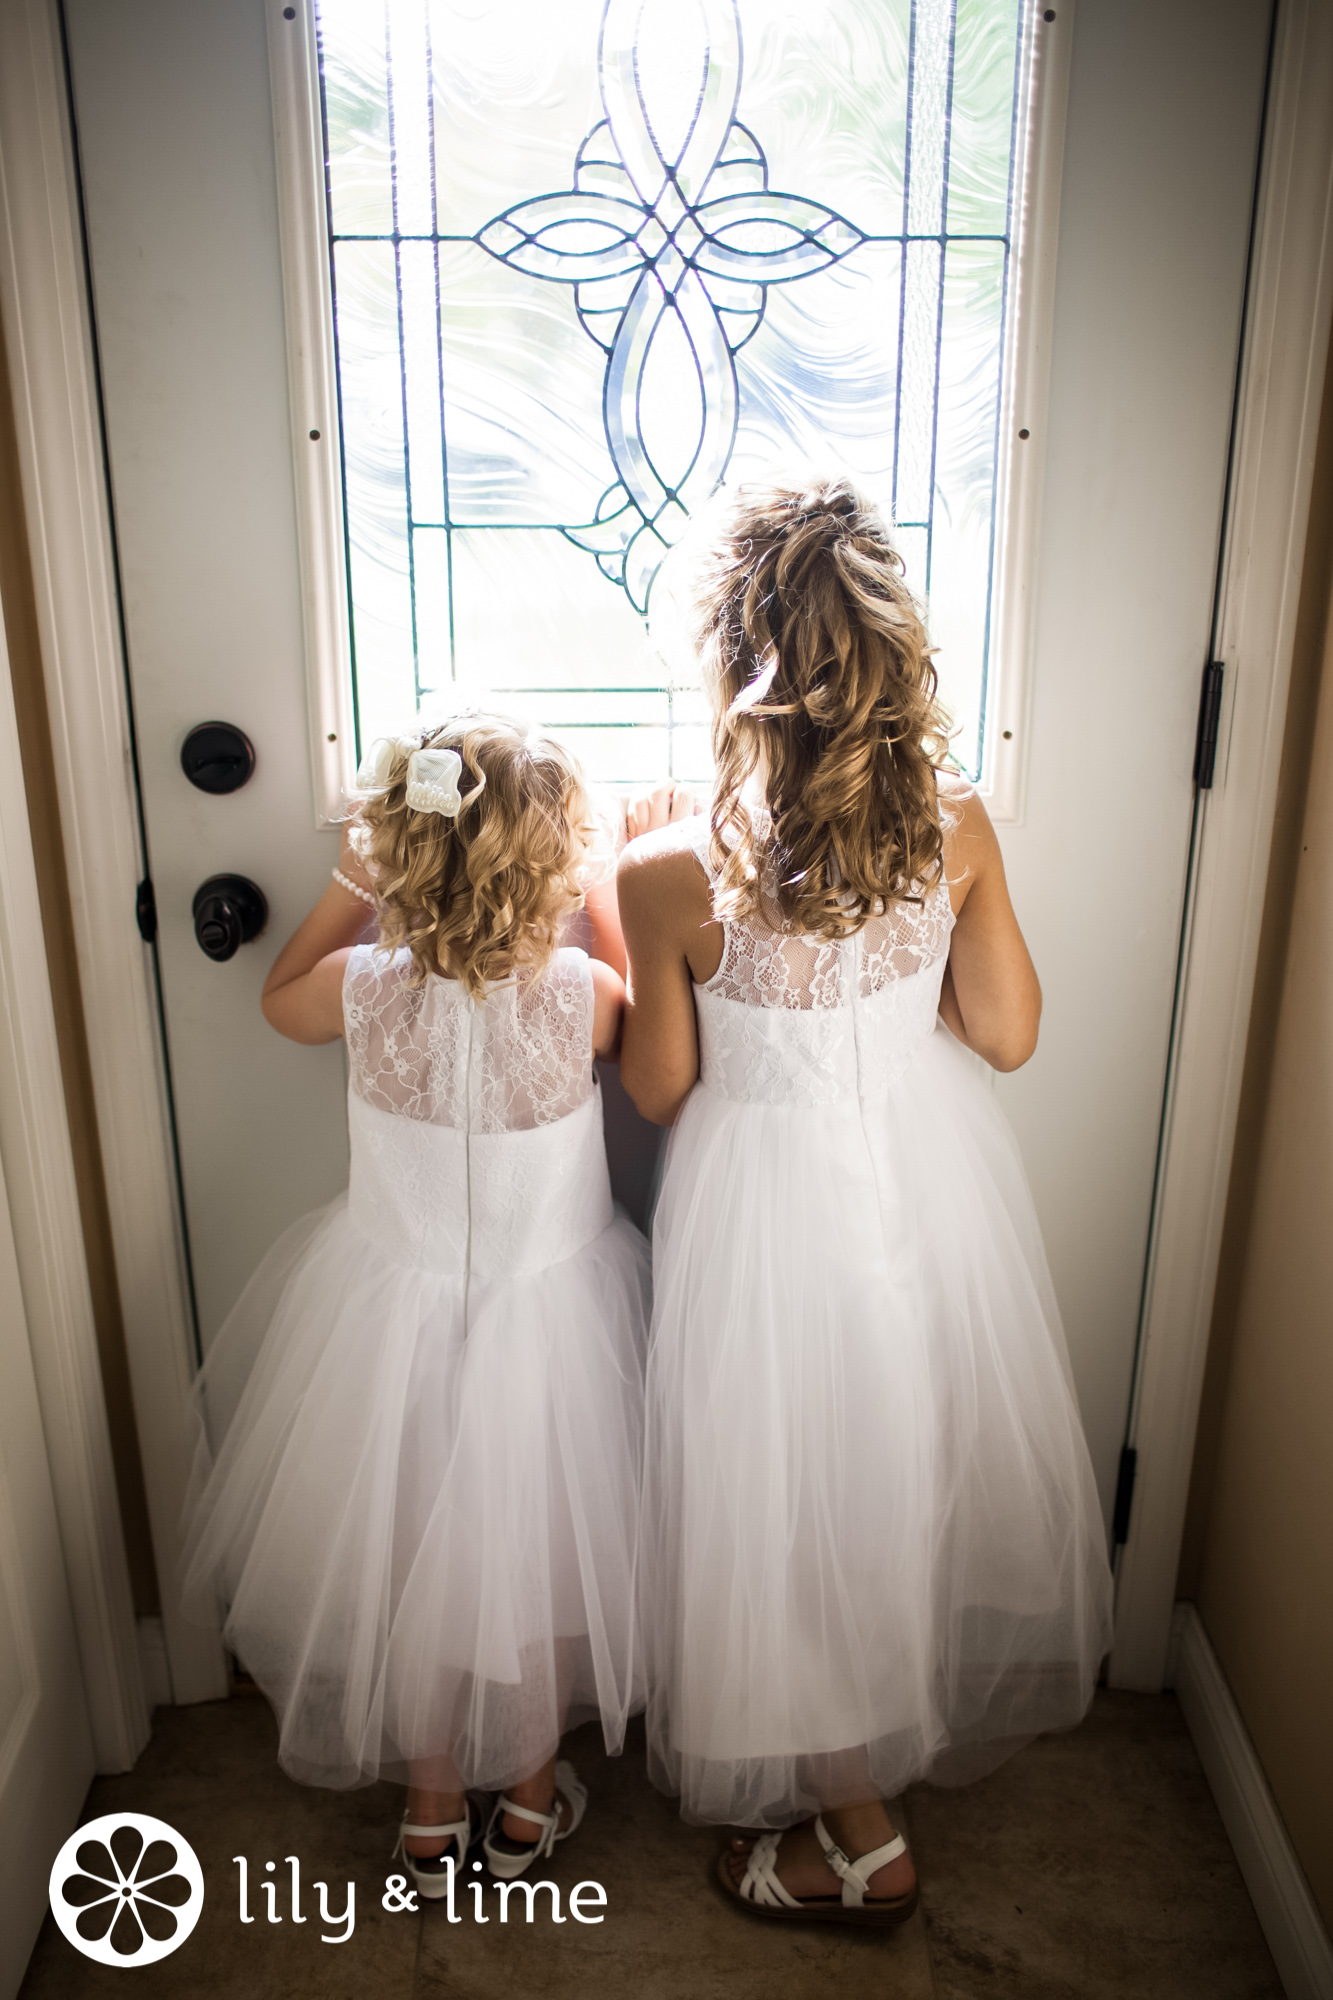 matching flower girl outfits